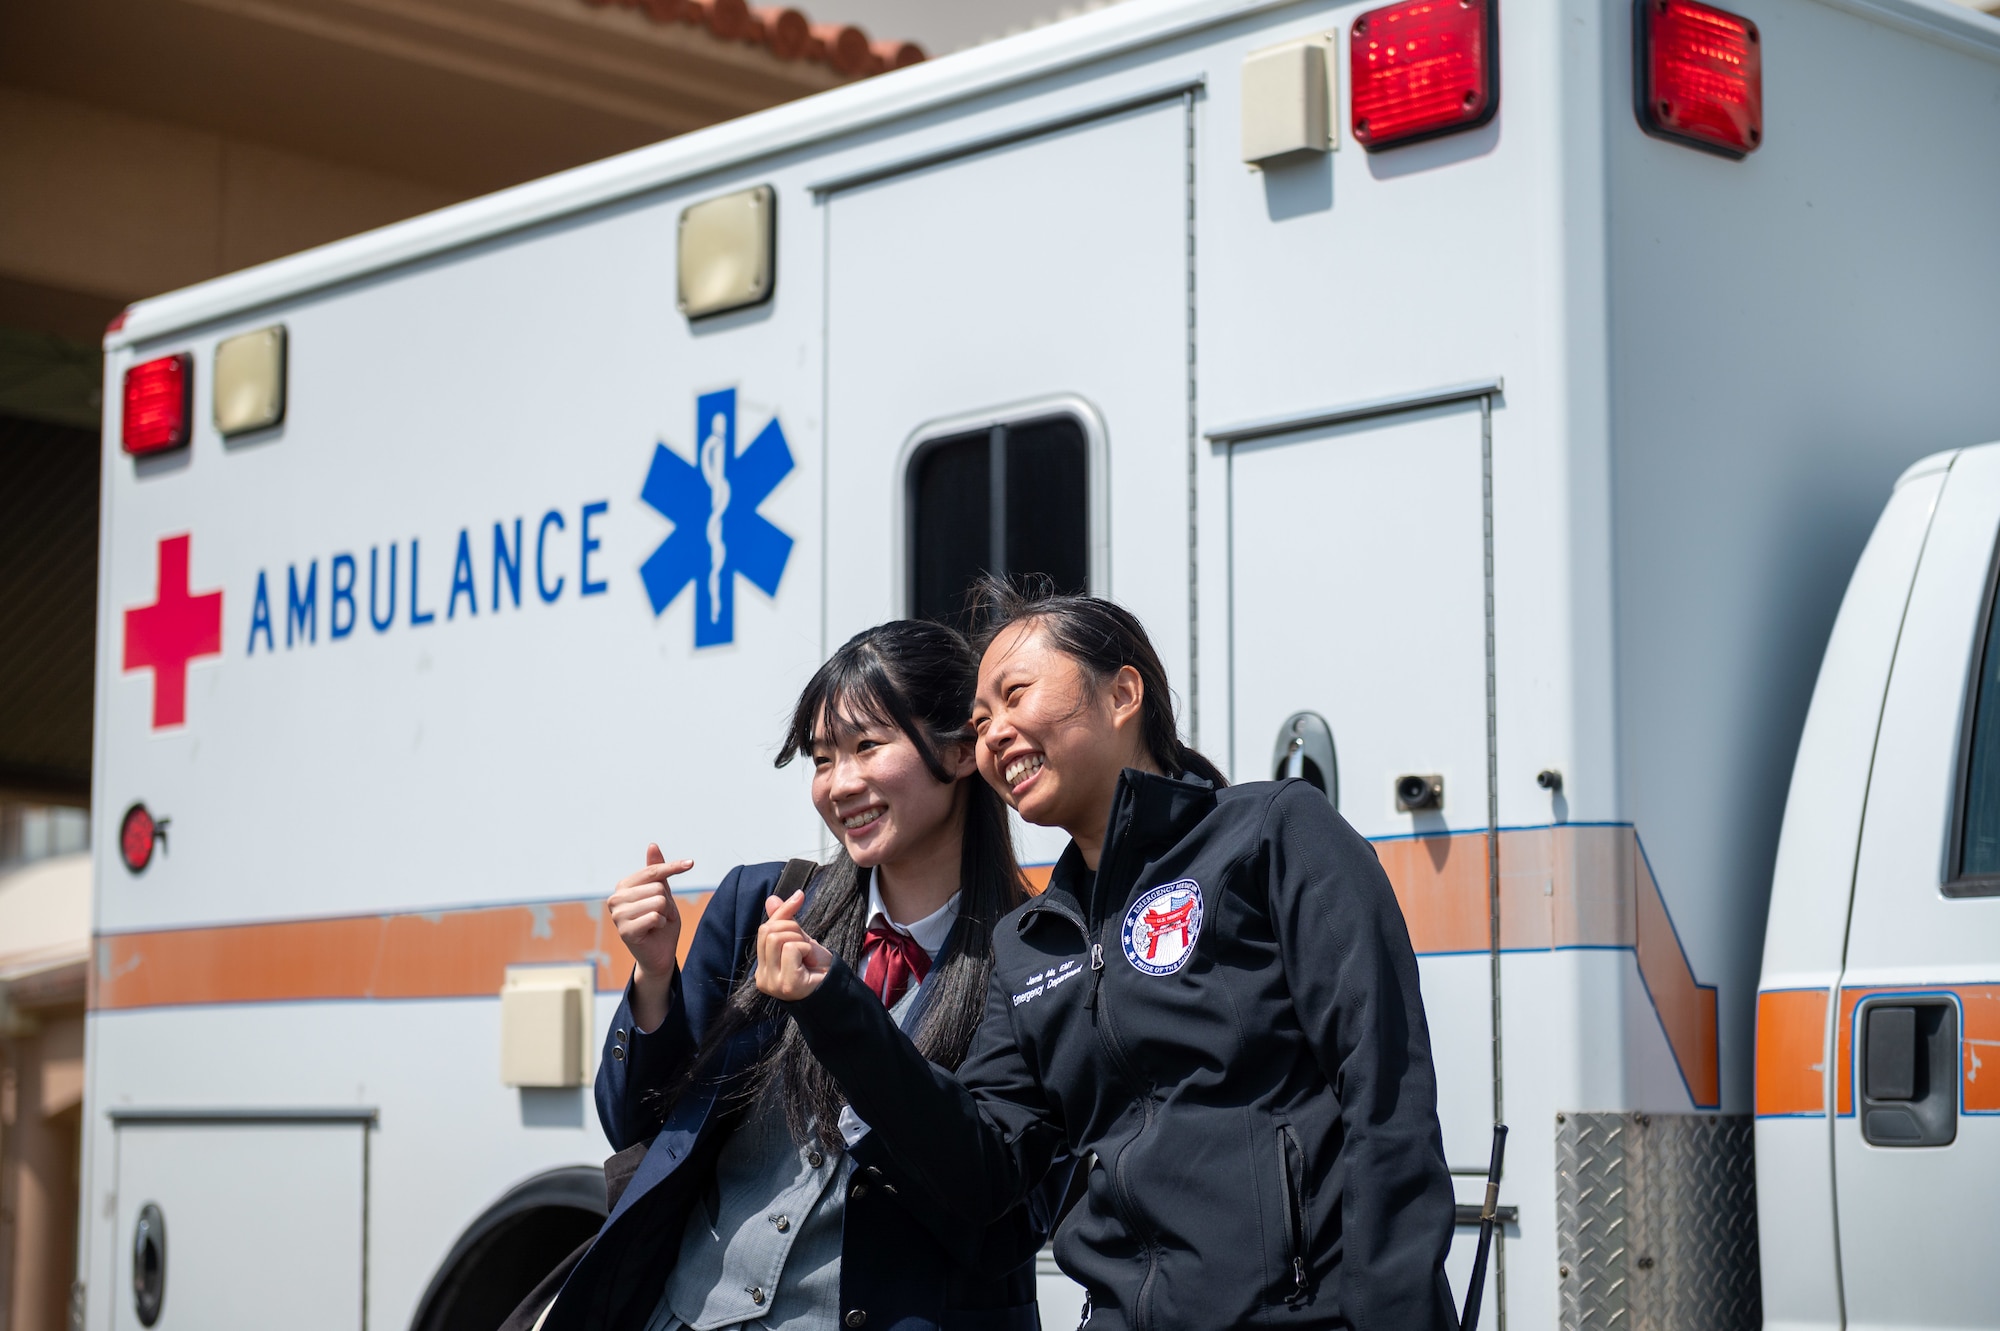 U.S. Air Force Staff Sgt. Jamie Ma, right, 18th Medical Group aerospace medical technician, takes a photo with an Okinawan student in front of an ambulance